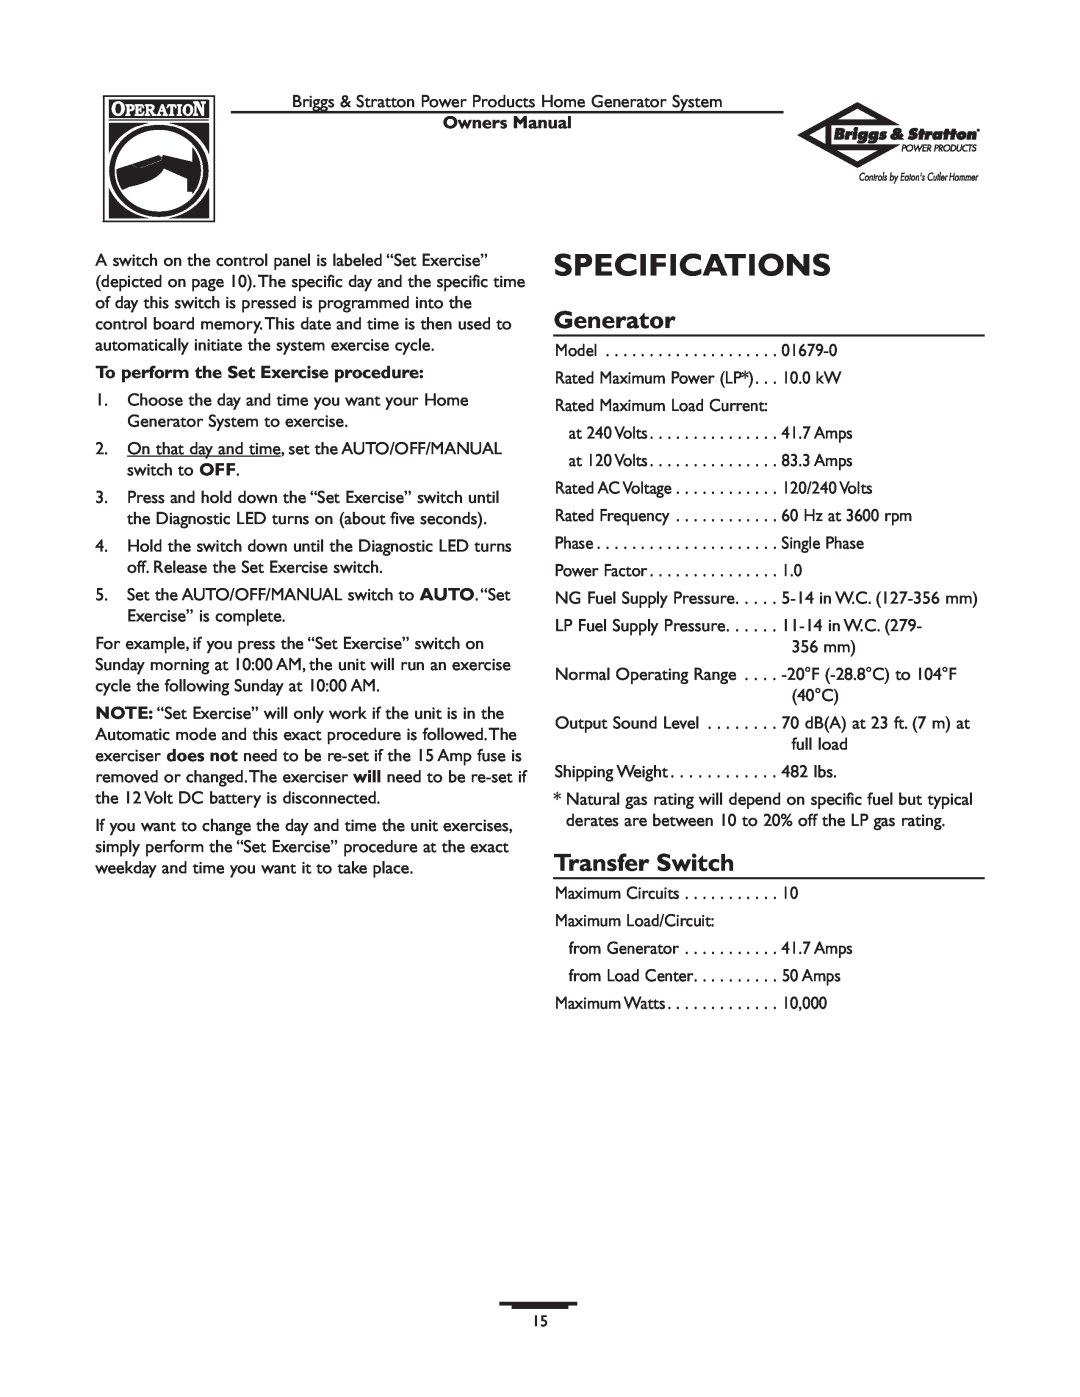 Briggs & Stratton 1679-0 Specifications, Generator, Transfer Switch, Owners Manual, To perform the Set Exercise procedure 